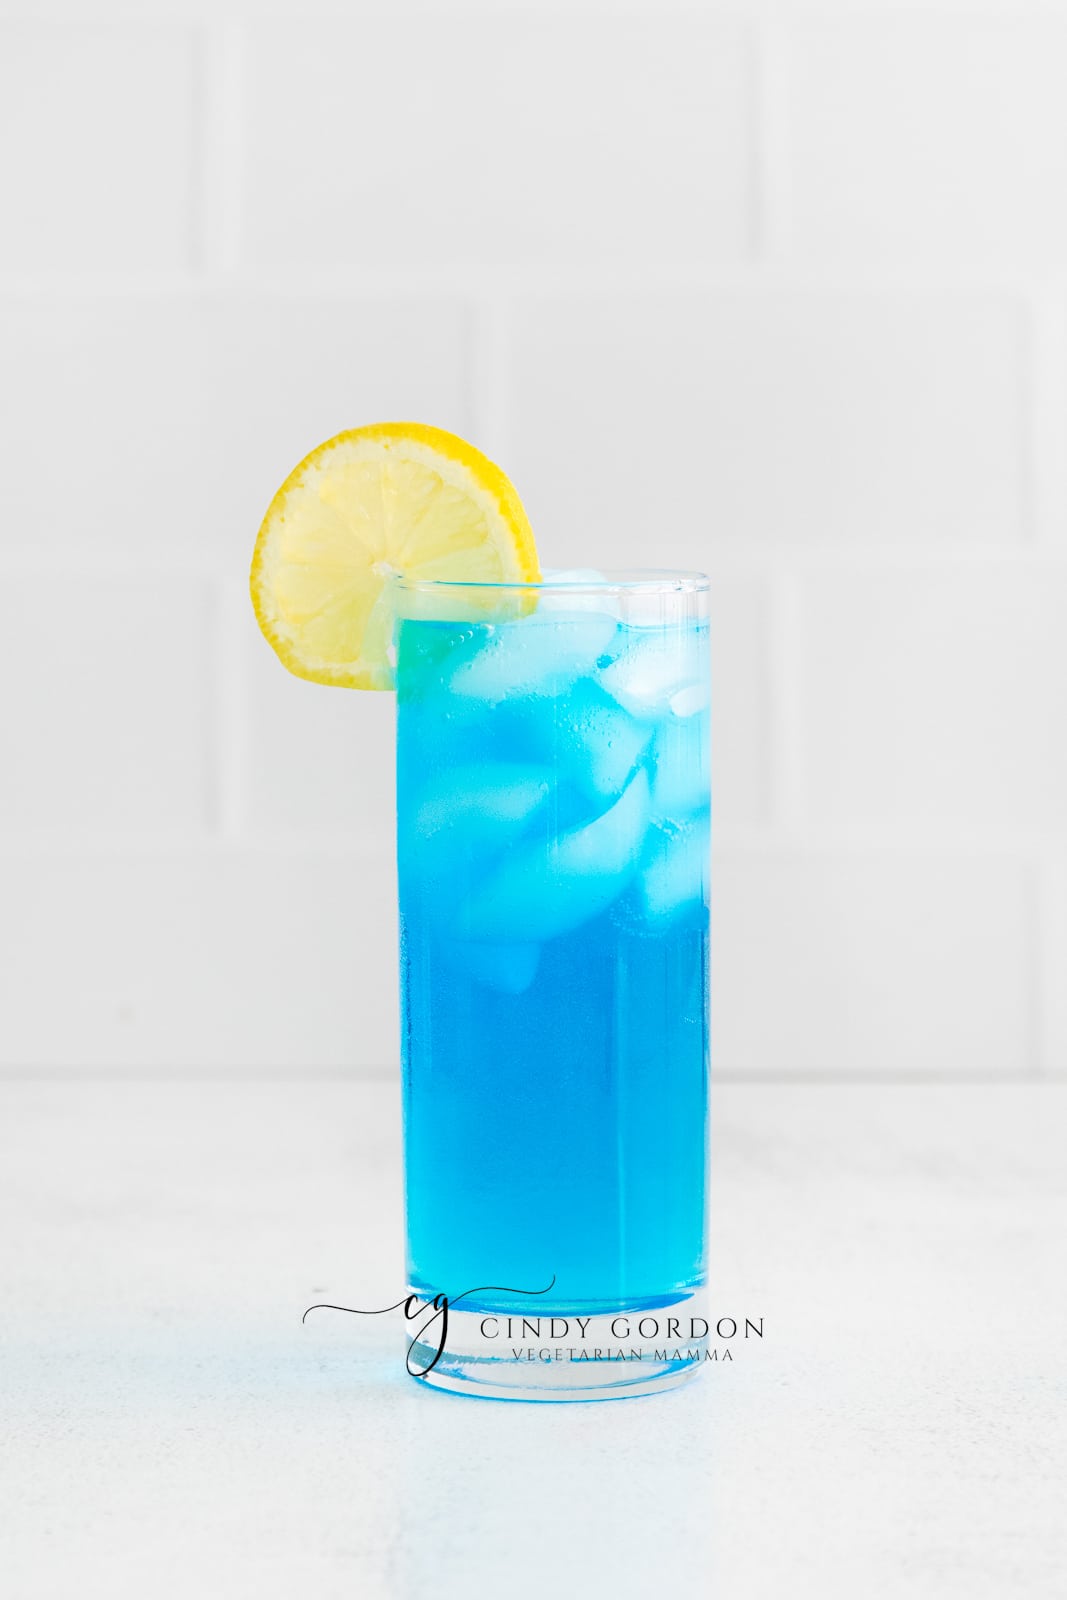 two clear tall glasses filled with ice and a blue liquid, topped with lemon slices